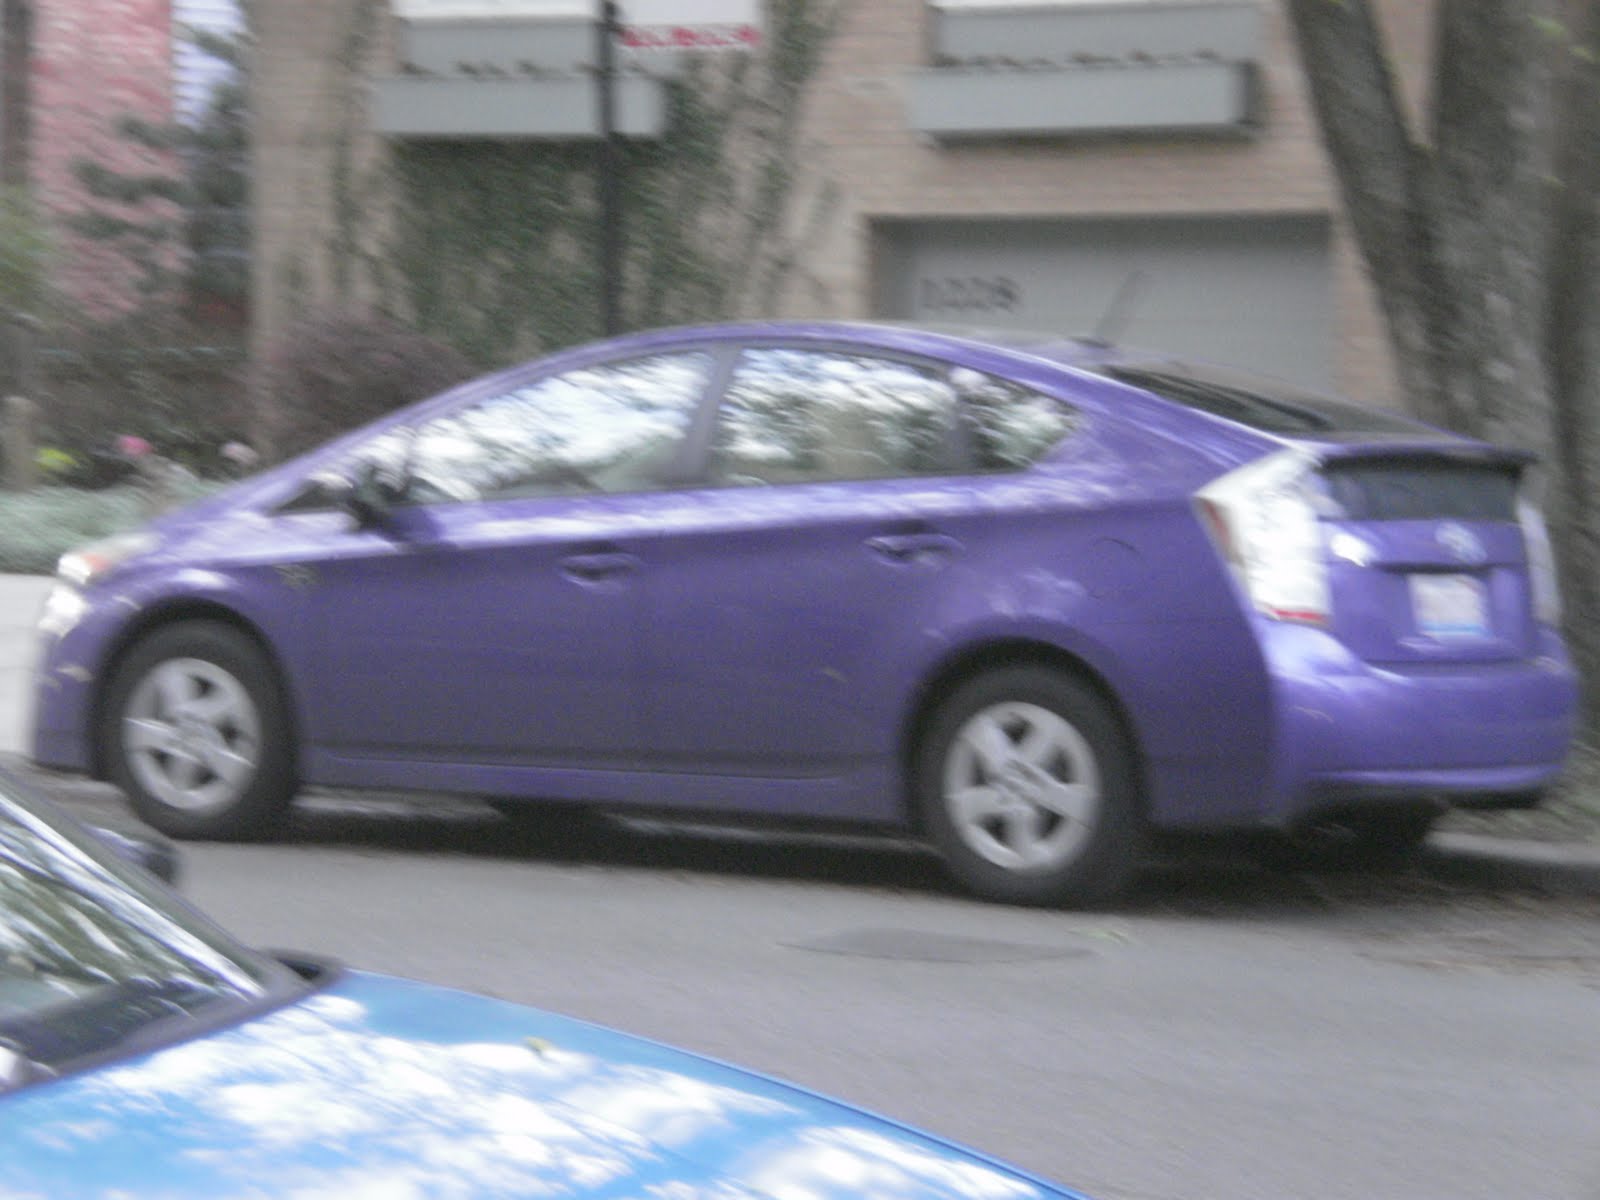 Little Asian Laughter: The Purple Prius